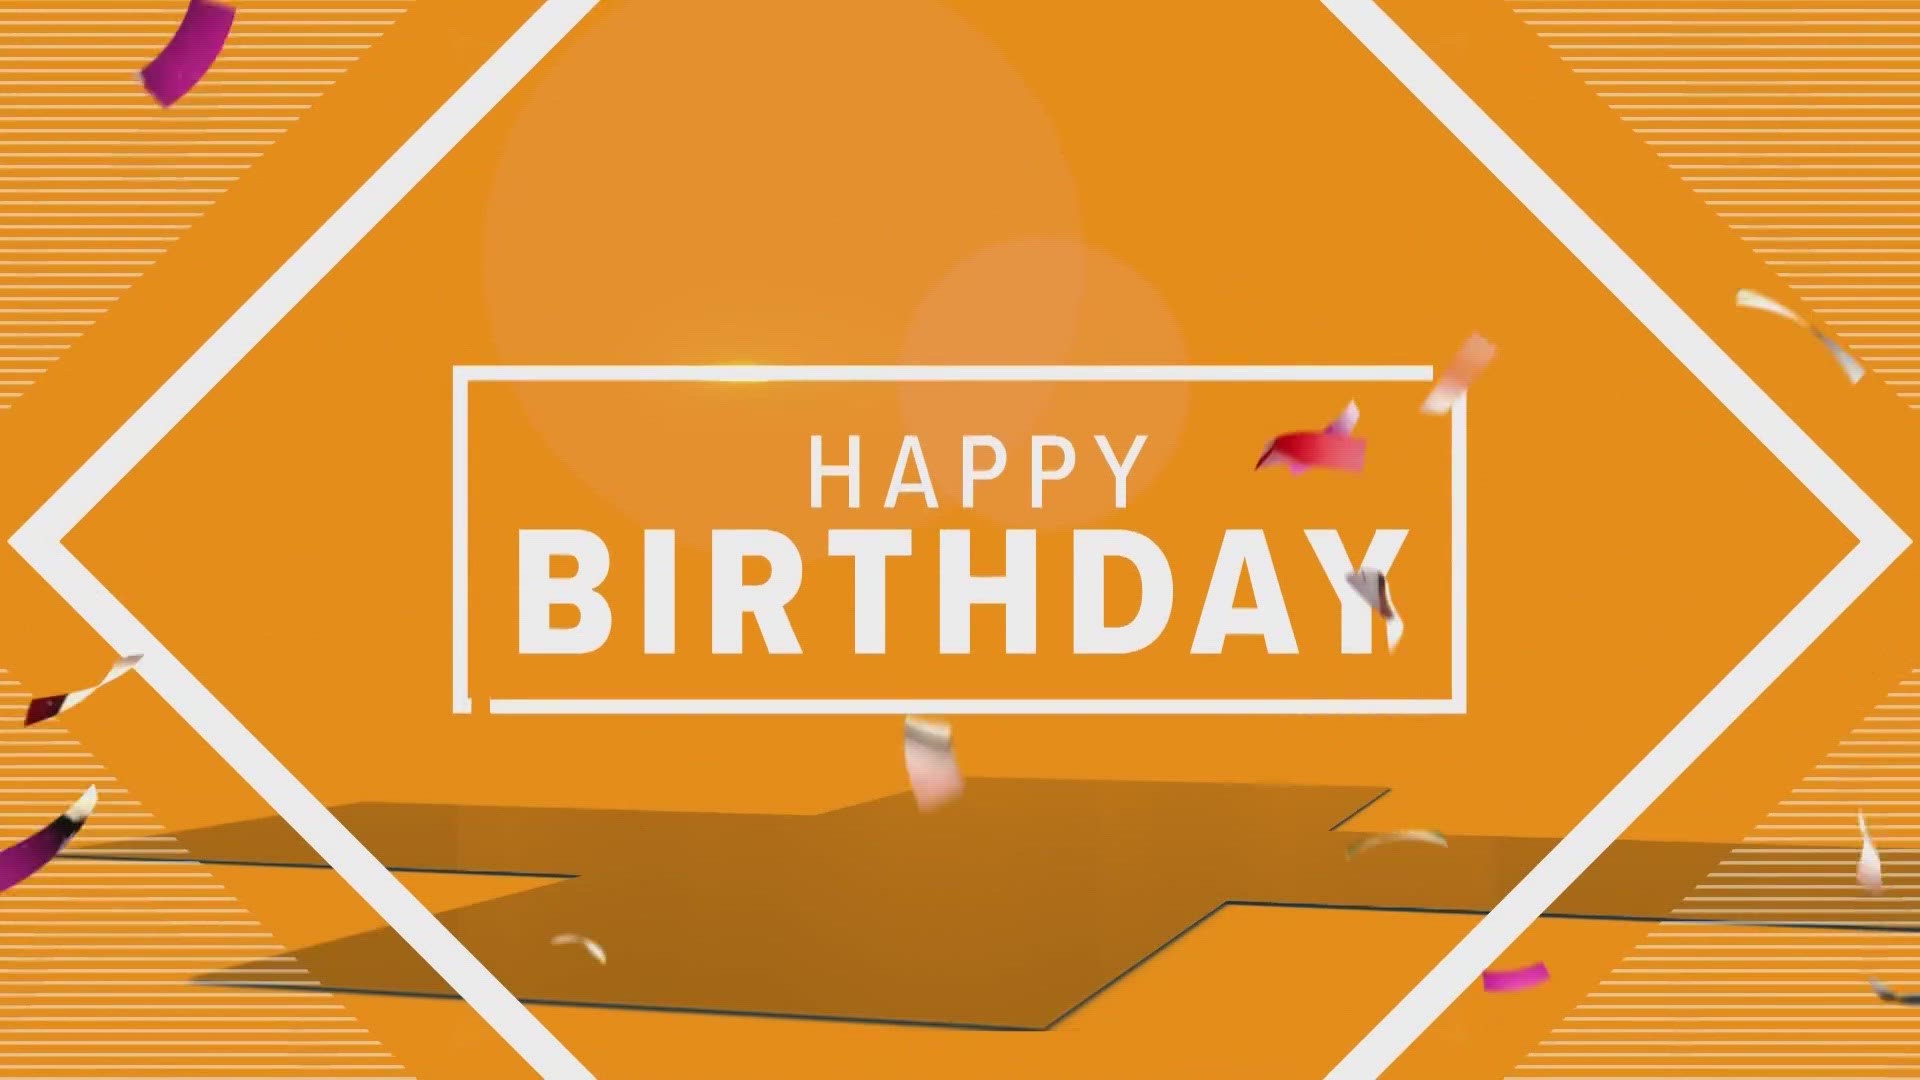 Texas Today wishes everyone born on October 13, a very happy birthday!